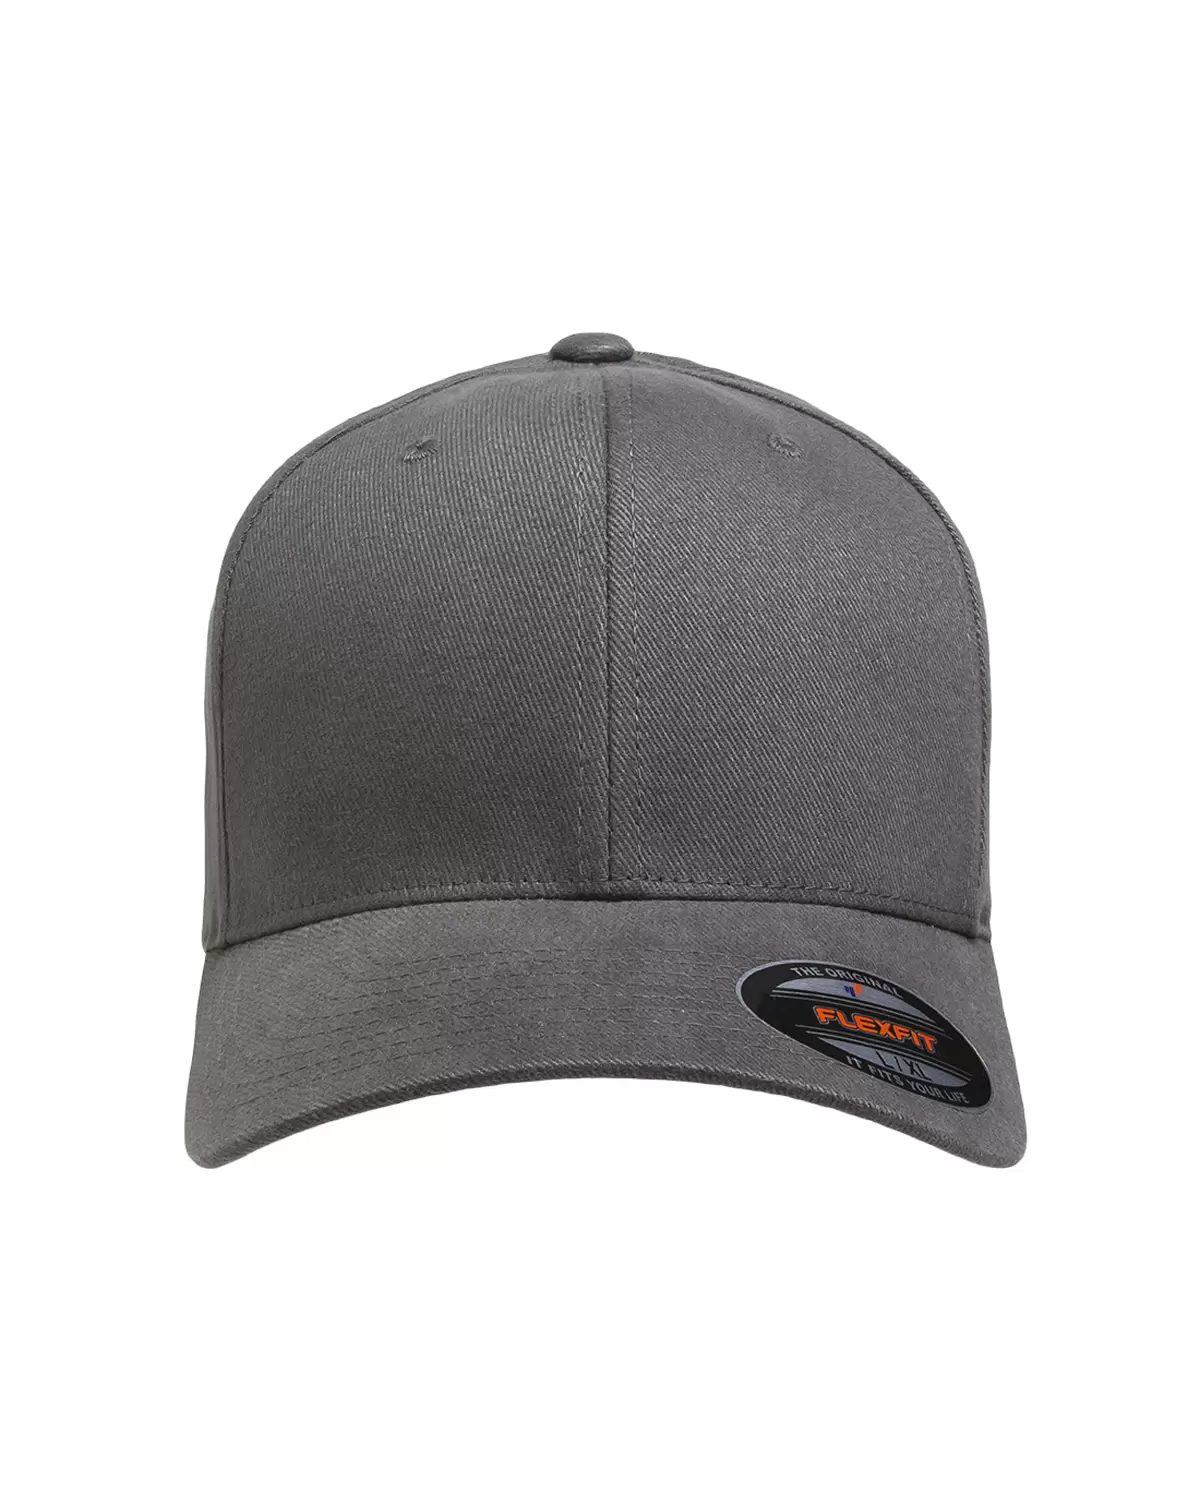 Flexfit 6377 Brushed Twill Cap From 